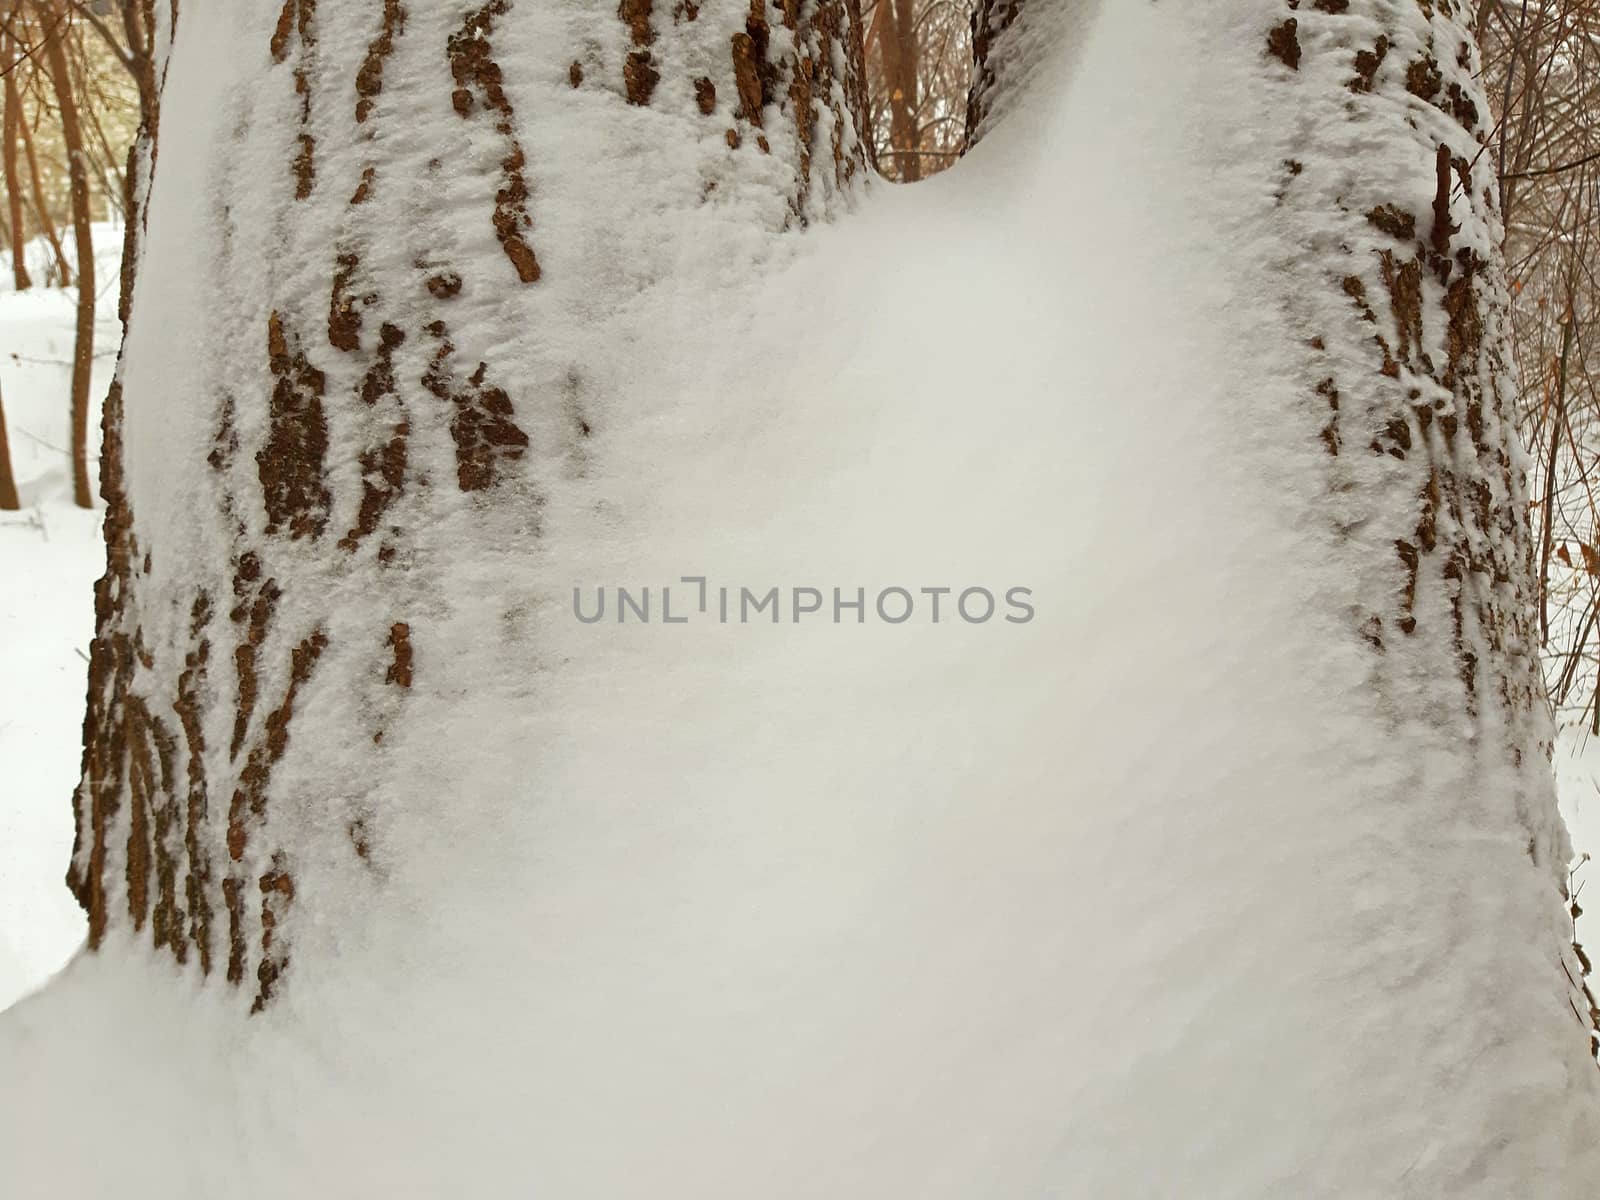 The thick stem of the tree and snow around by Mindru